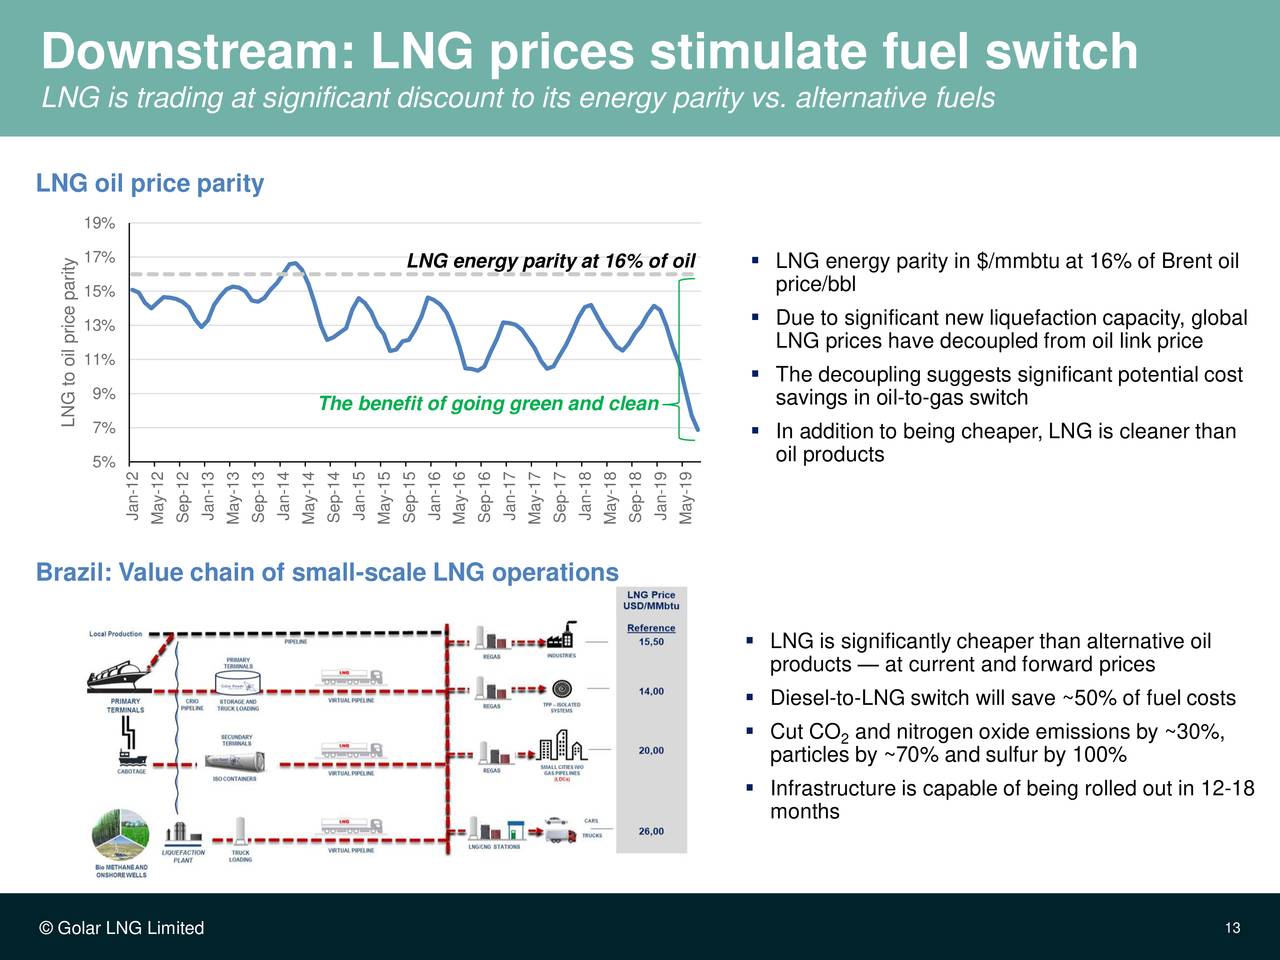 Downstream: LNG prices stimulate fuel switch